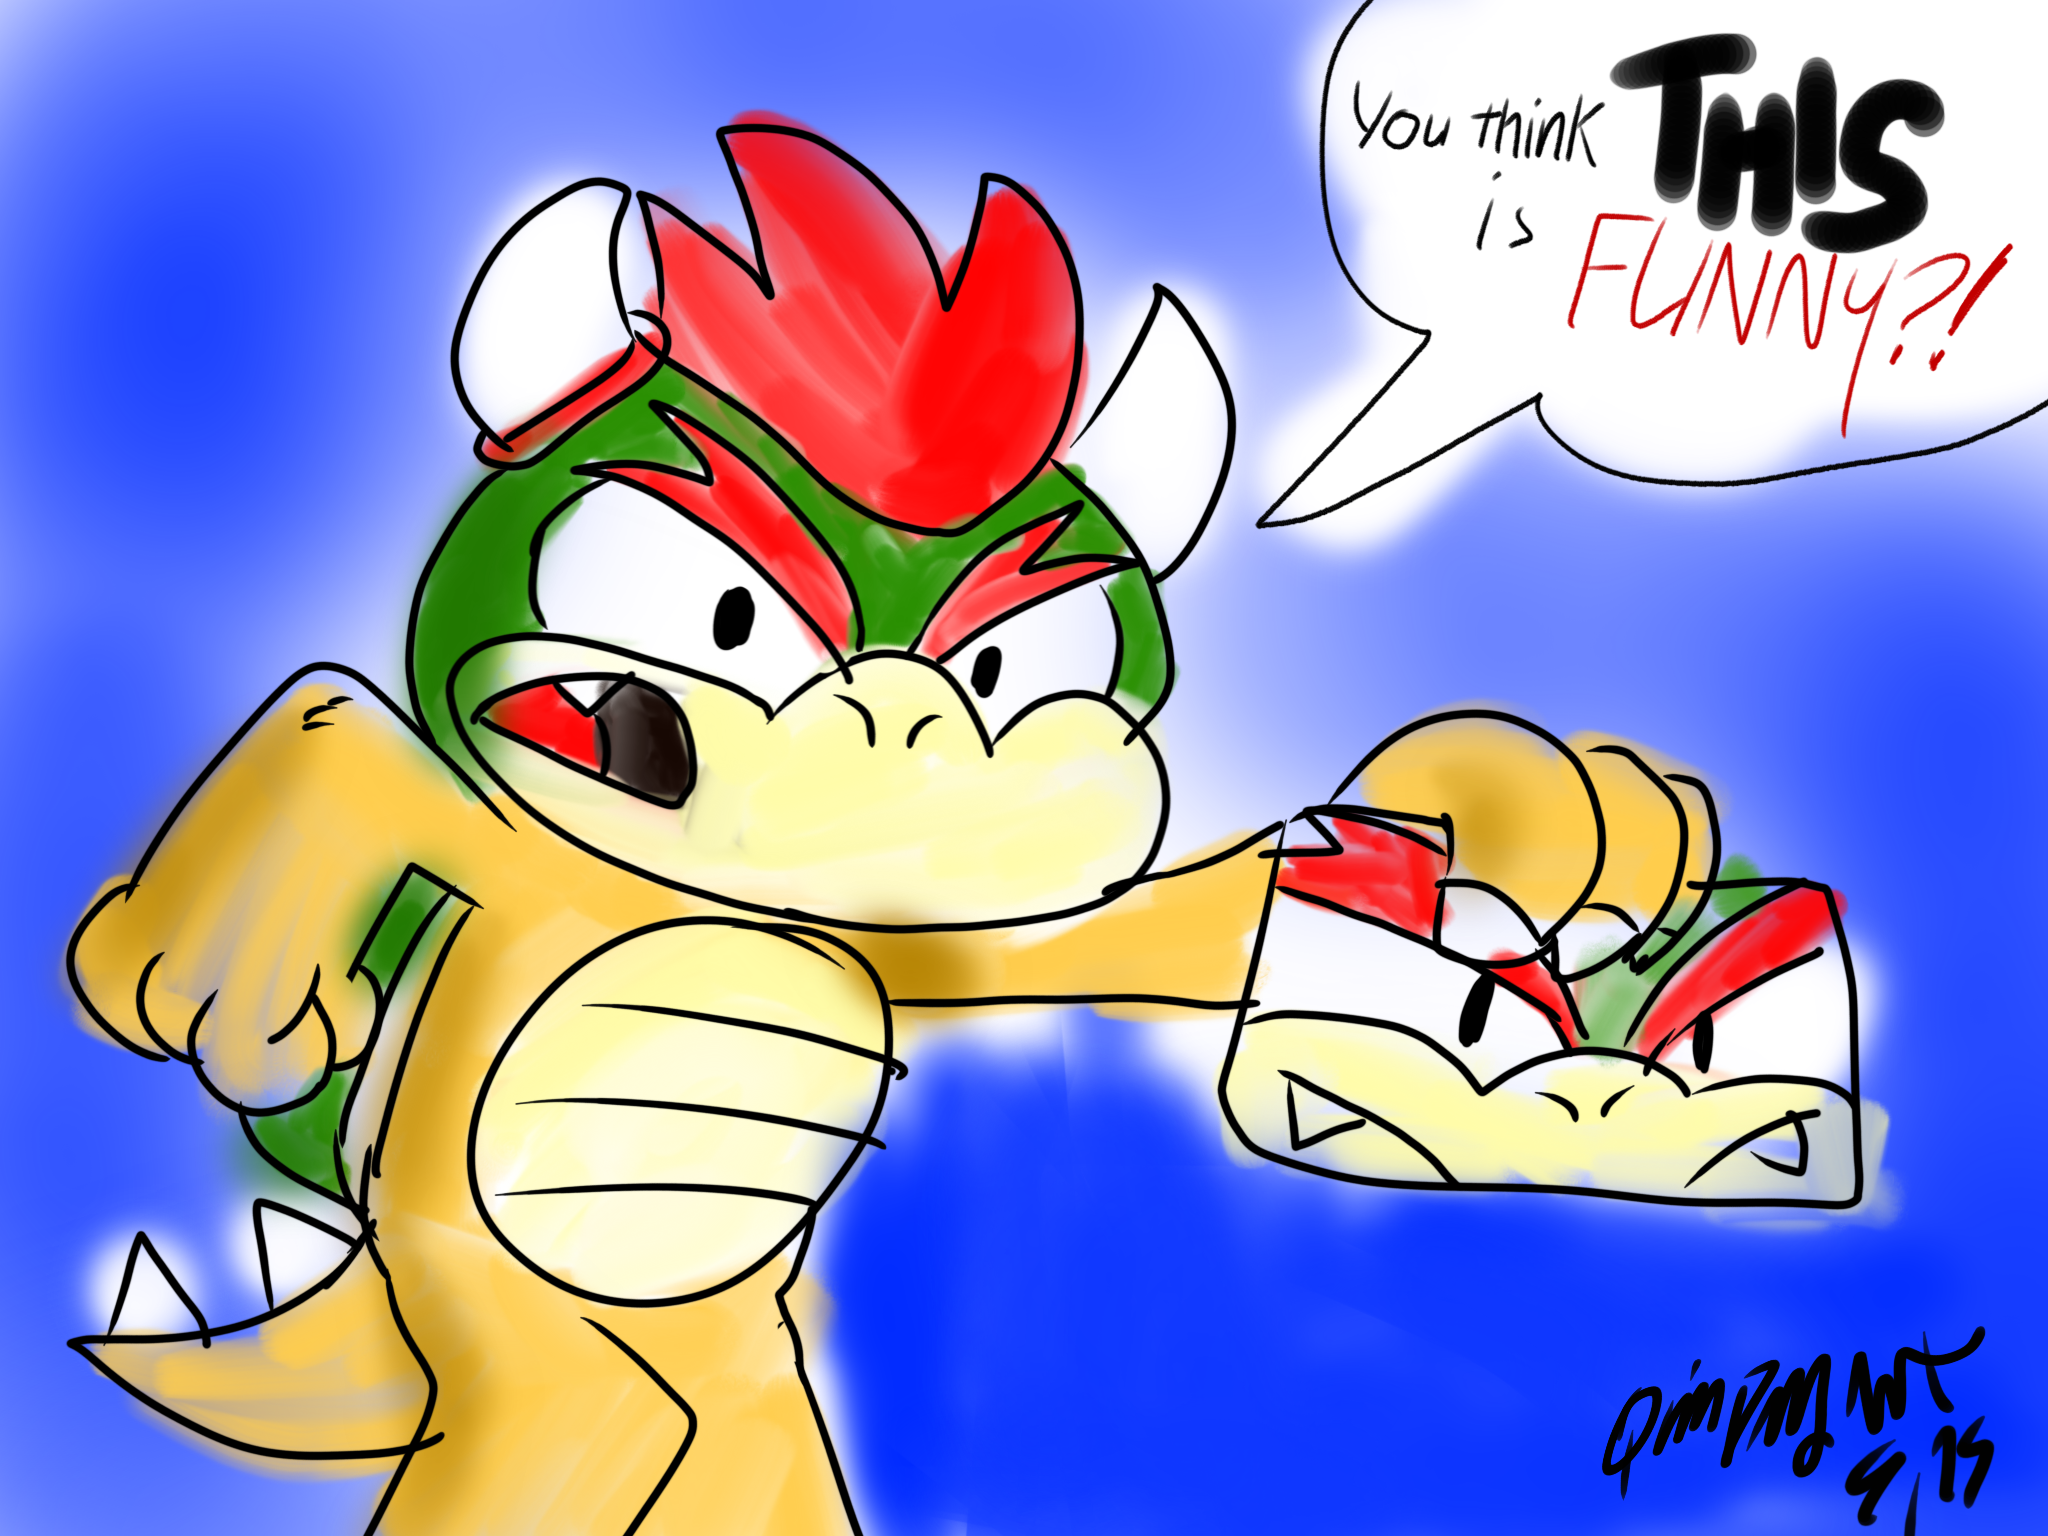 Super Mario Bros. - Bowser LC by LiamCampbell on DeviantArt